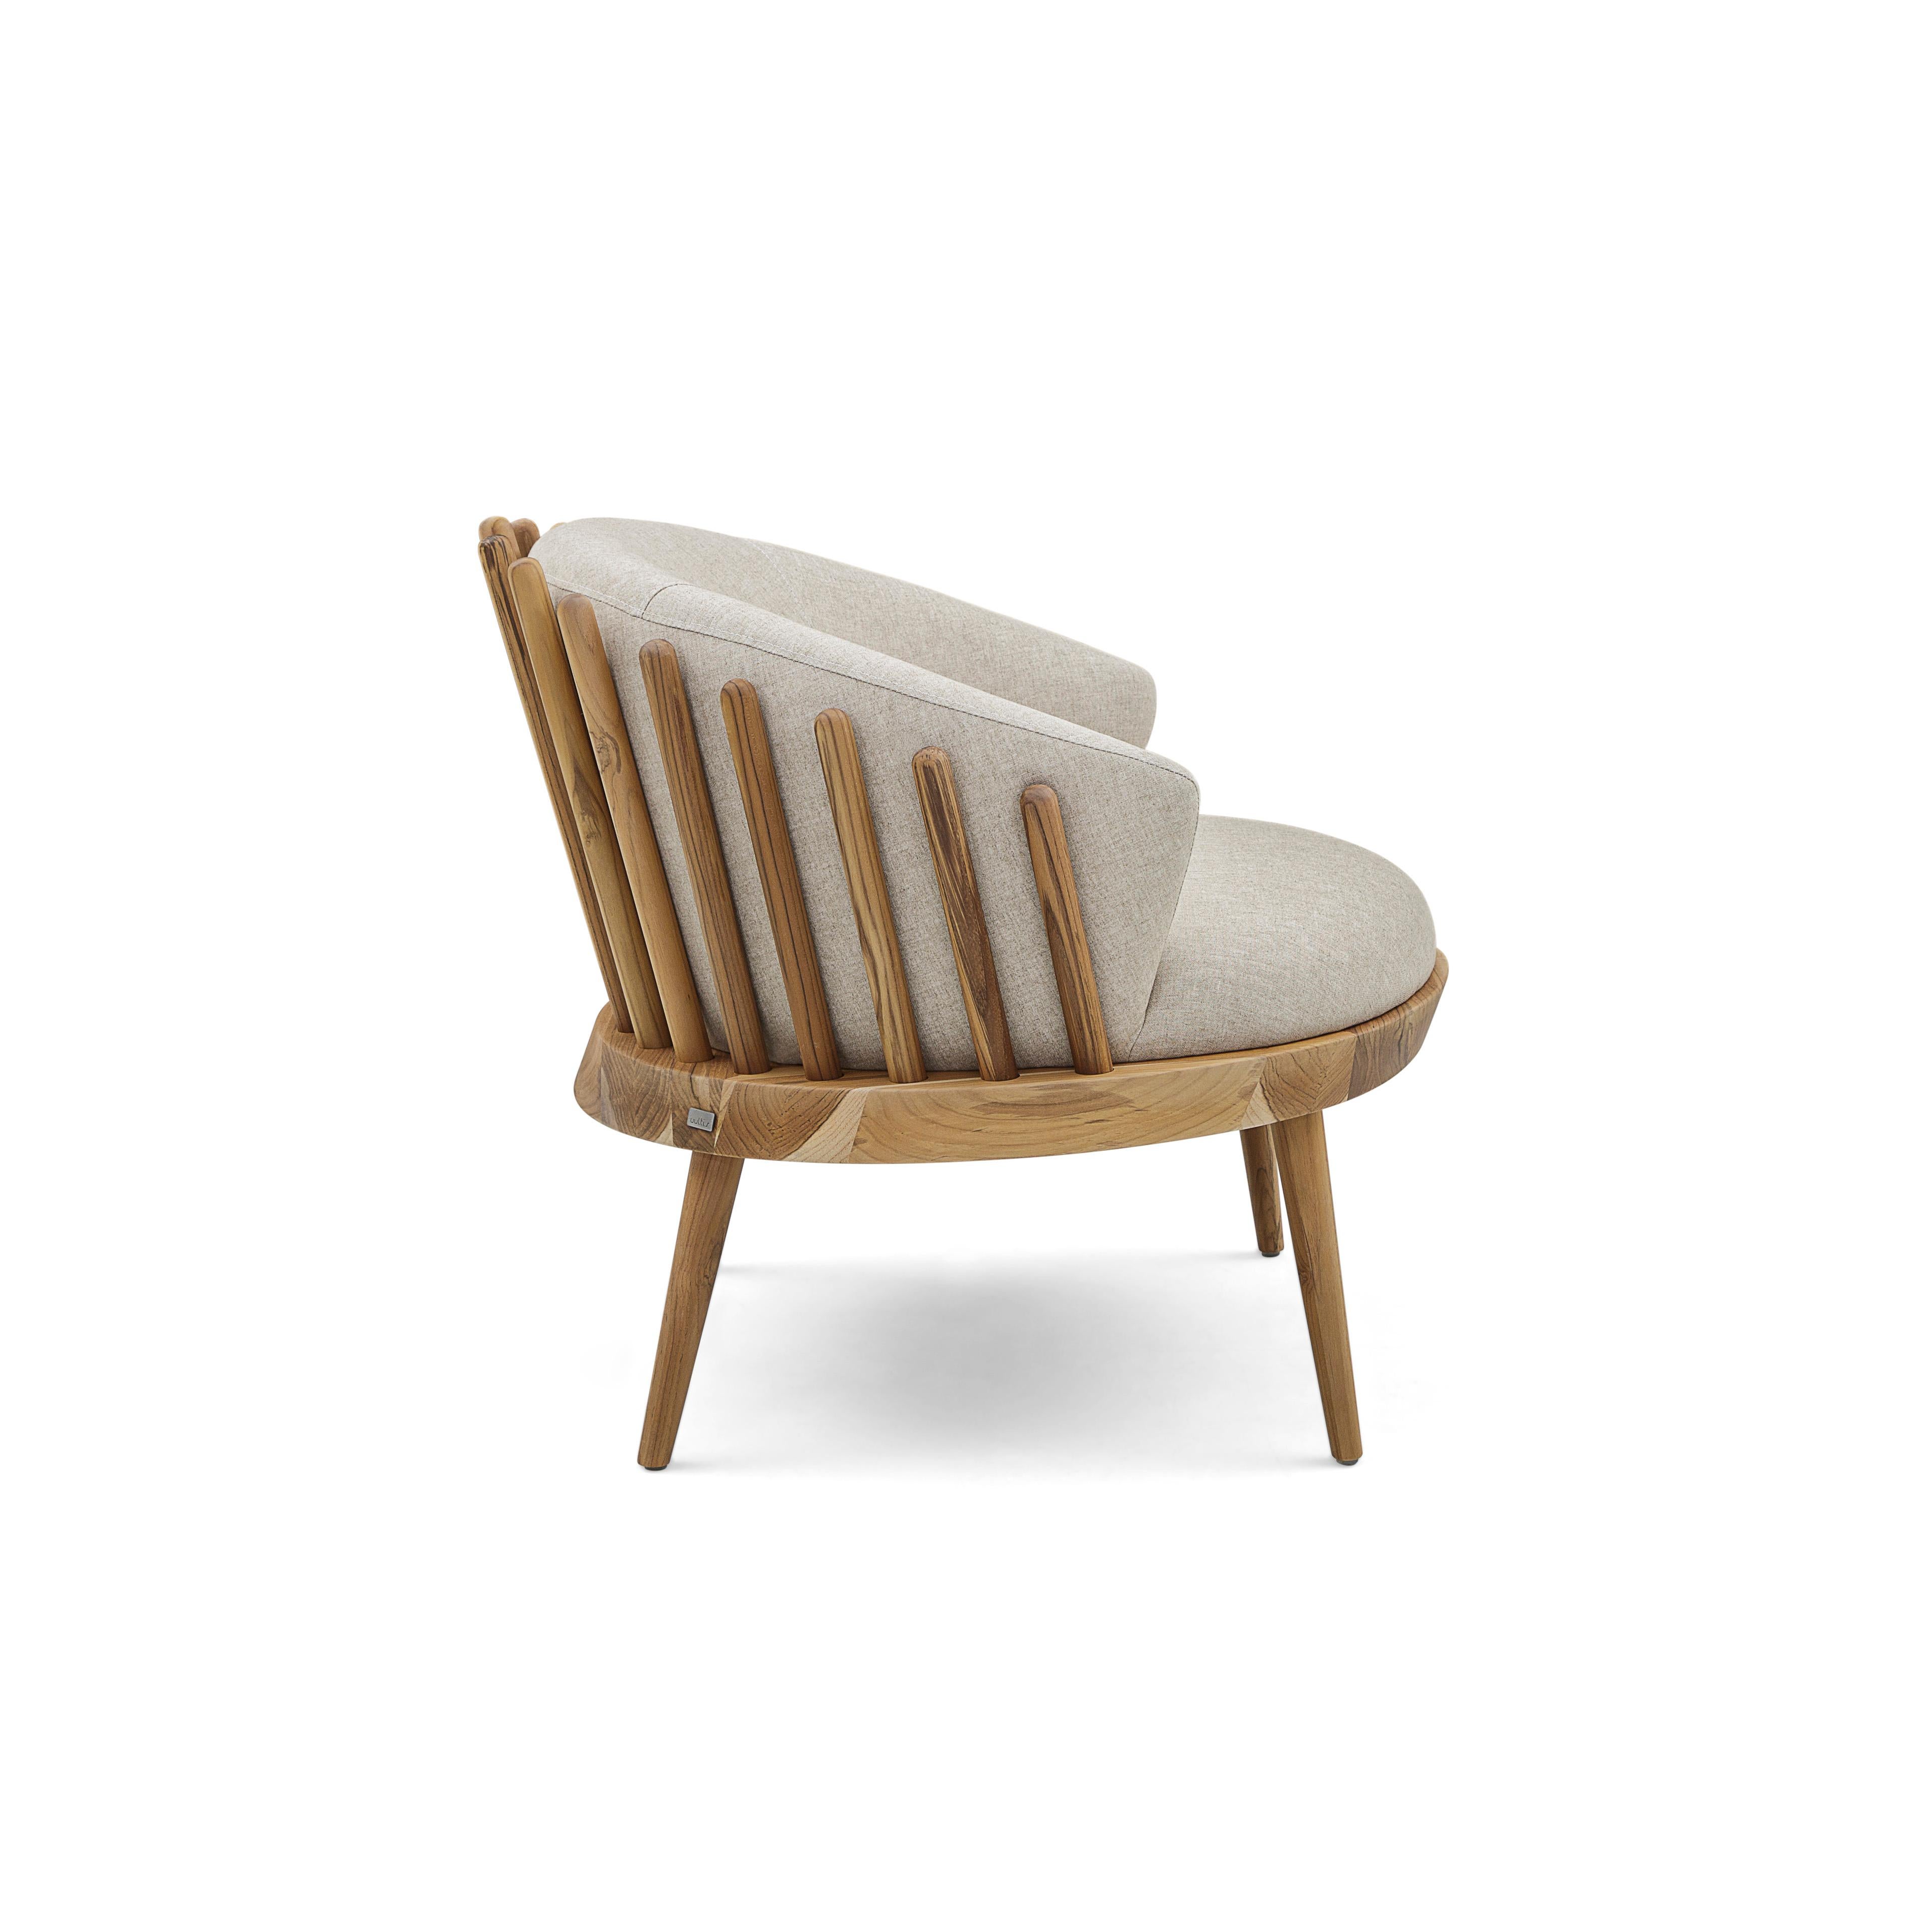 Fane Upholstered Armchair in Teak Wood Finish and Beige Fabric In New Condition For Sale In Miami, FL